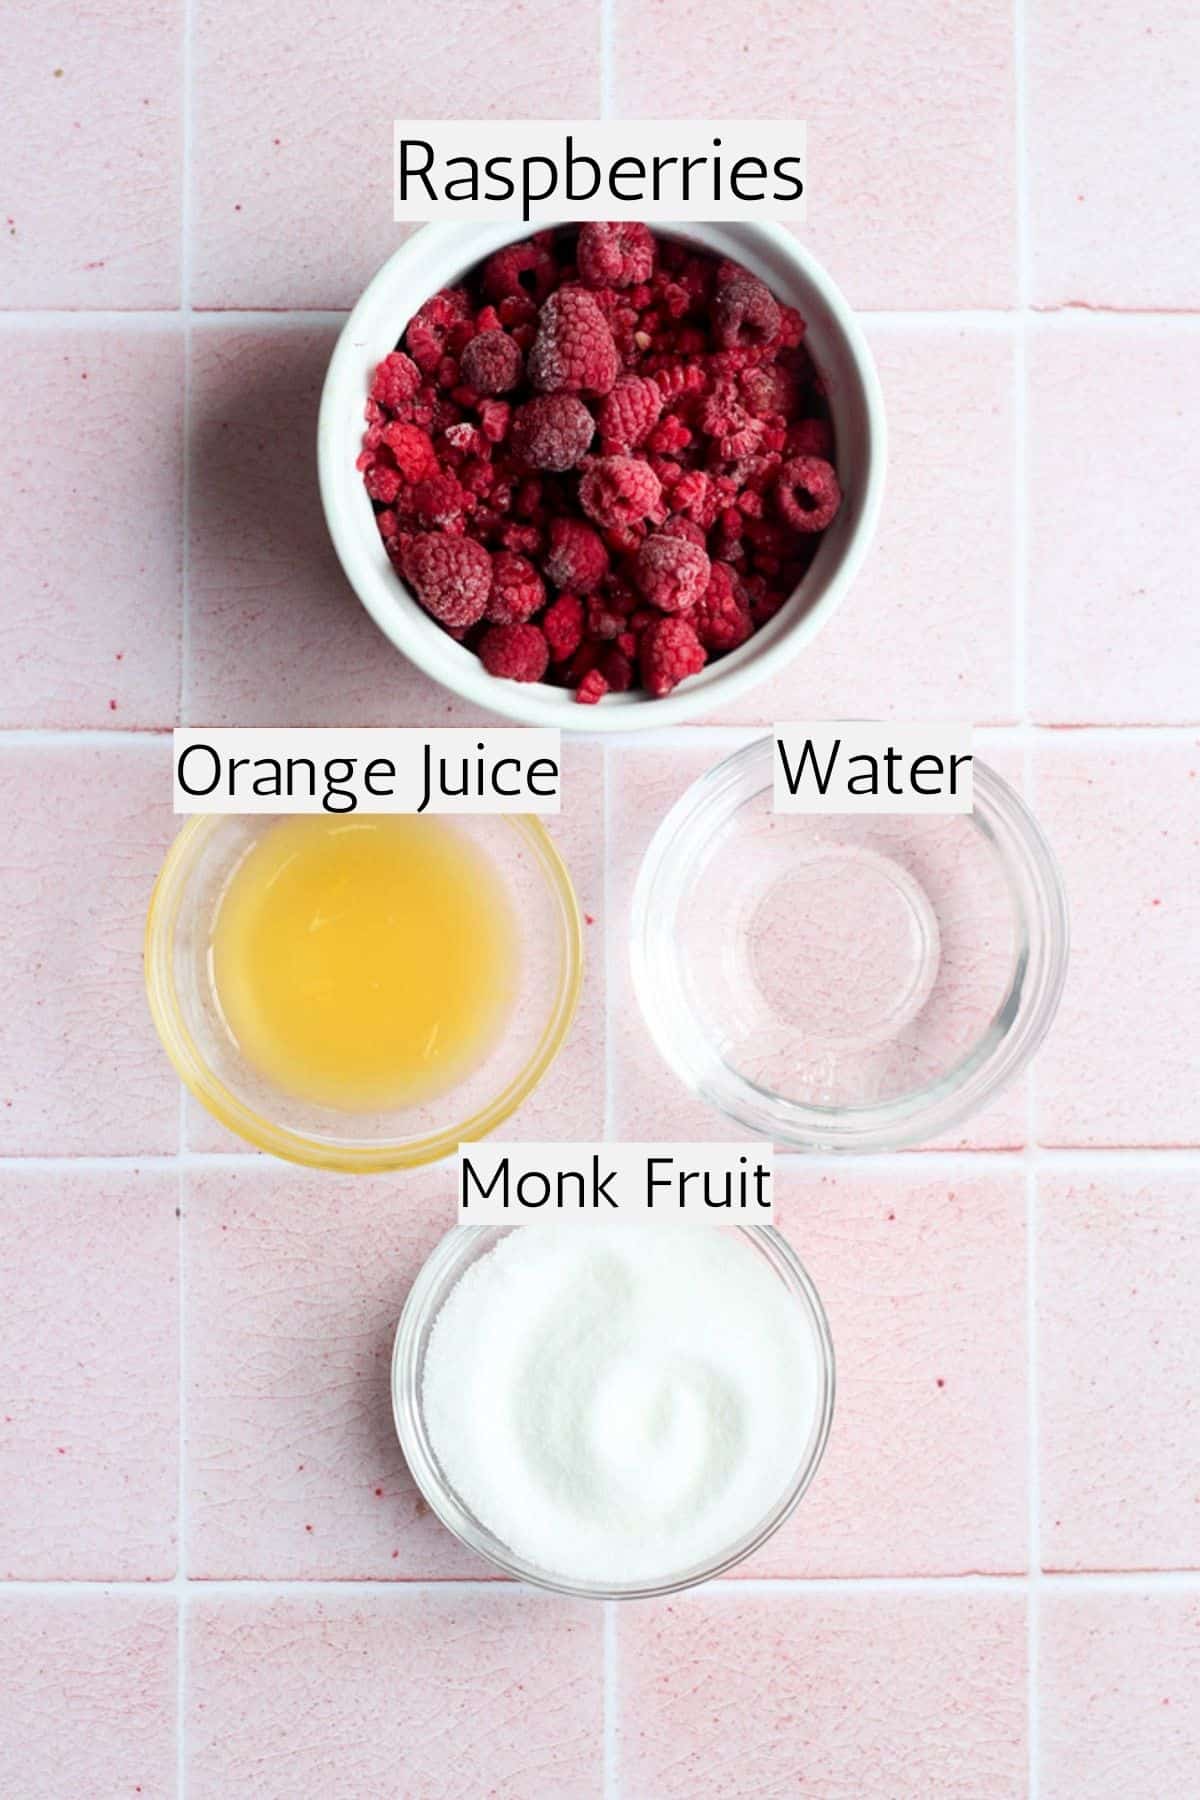 ingredients to make raspberry compote labeled with black text.